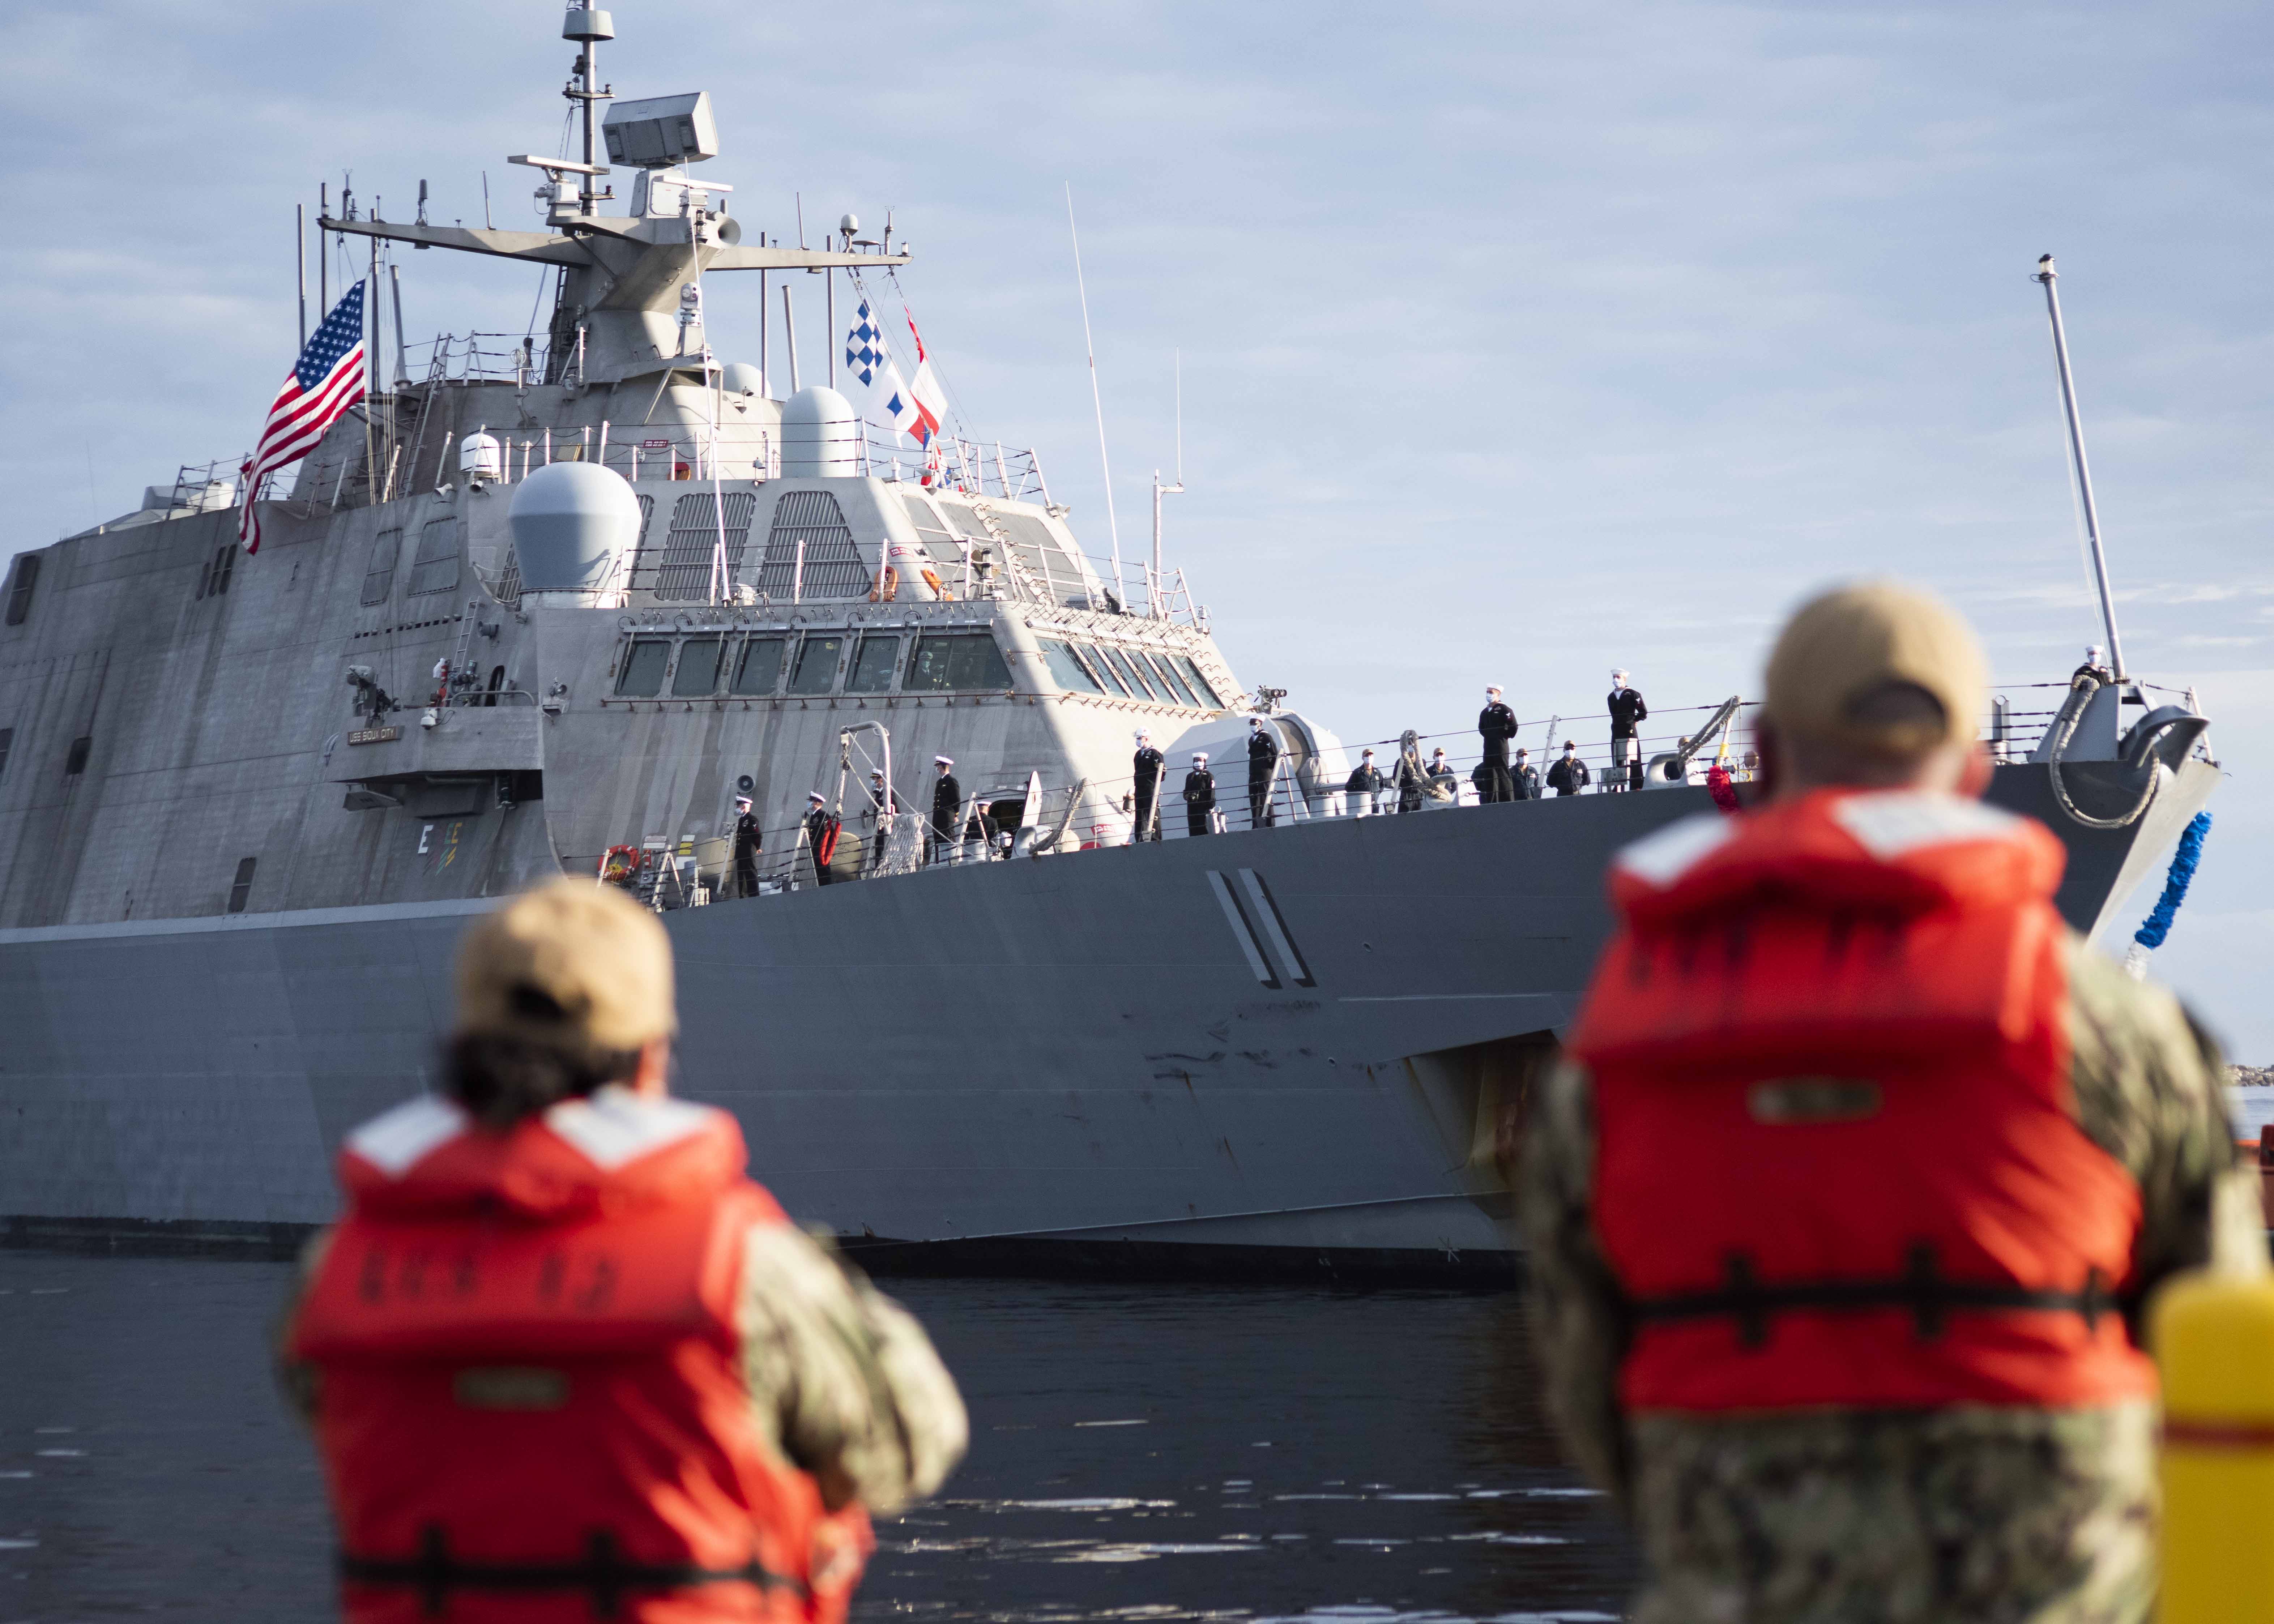 The Freedom-variant littoral combat ship USS Sioux City (LCS 11) prepares to moor at Naval Station Mayport. Sioux City returned to Mayport following a deployment to the U.S. 4th Fleet area of operations.